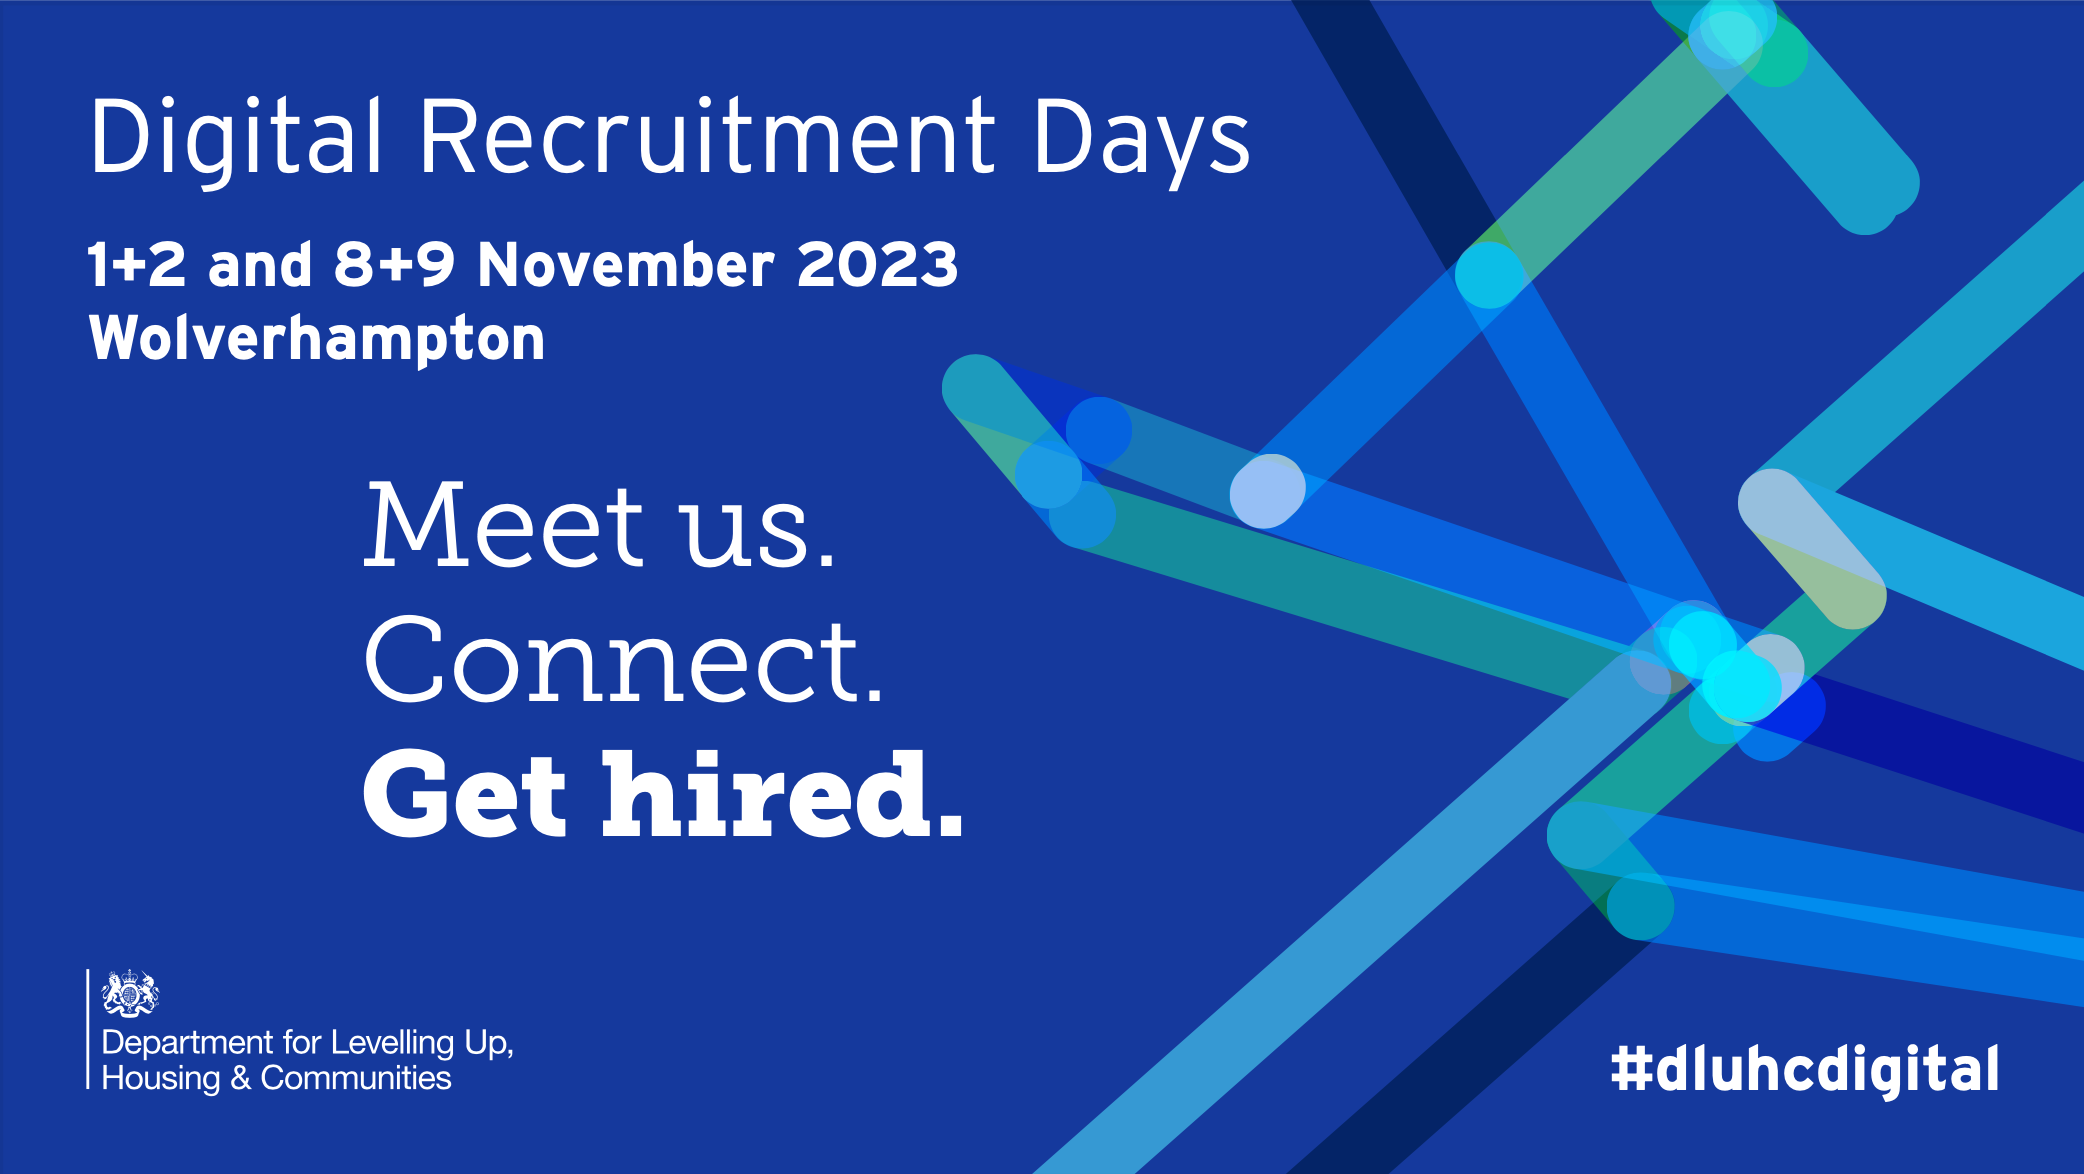 The Department for Levelling up, Housing and Communities (DLUHC Digital Recruitment Days in Wolverhampton on 1, 2, 8 and 9 November 2023. Meet us. Connect. Get hired. #dluhcdigital